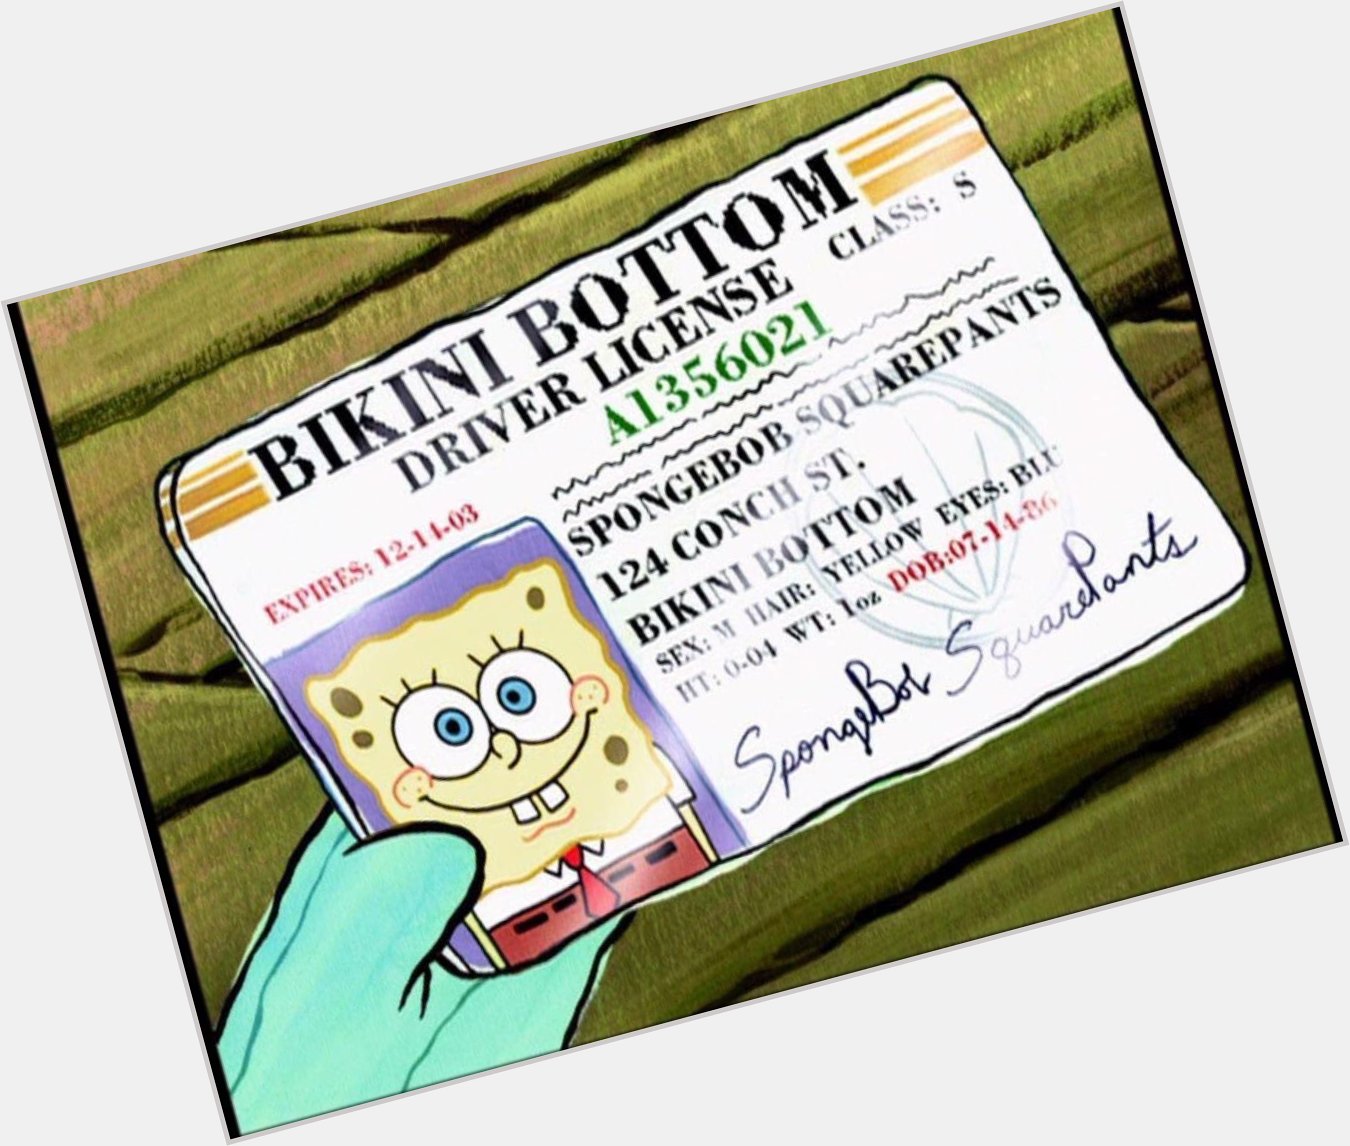 We wish a happy 32nd birthday to Spongebob Squarepants. Without the show, message would have boring memes 